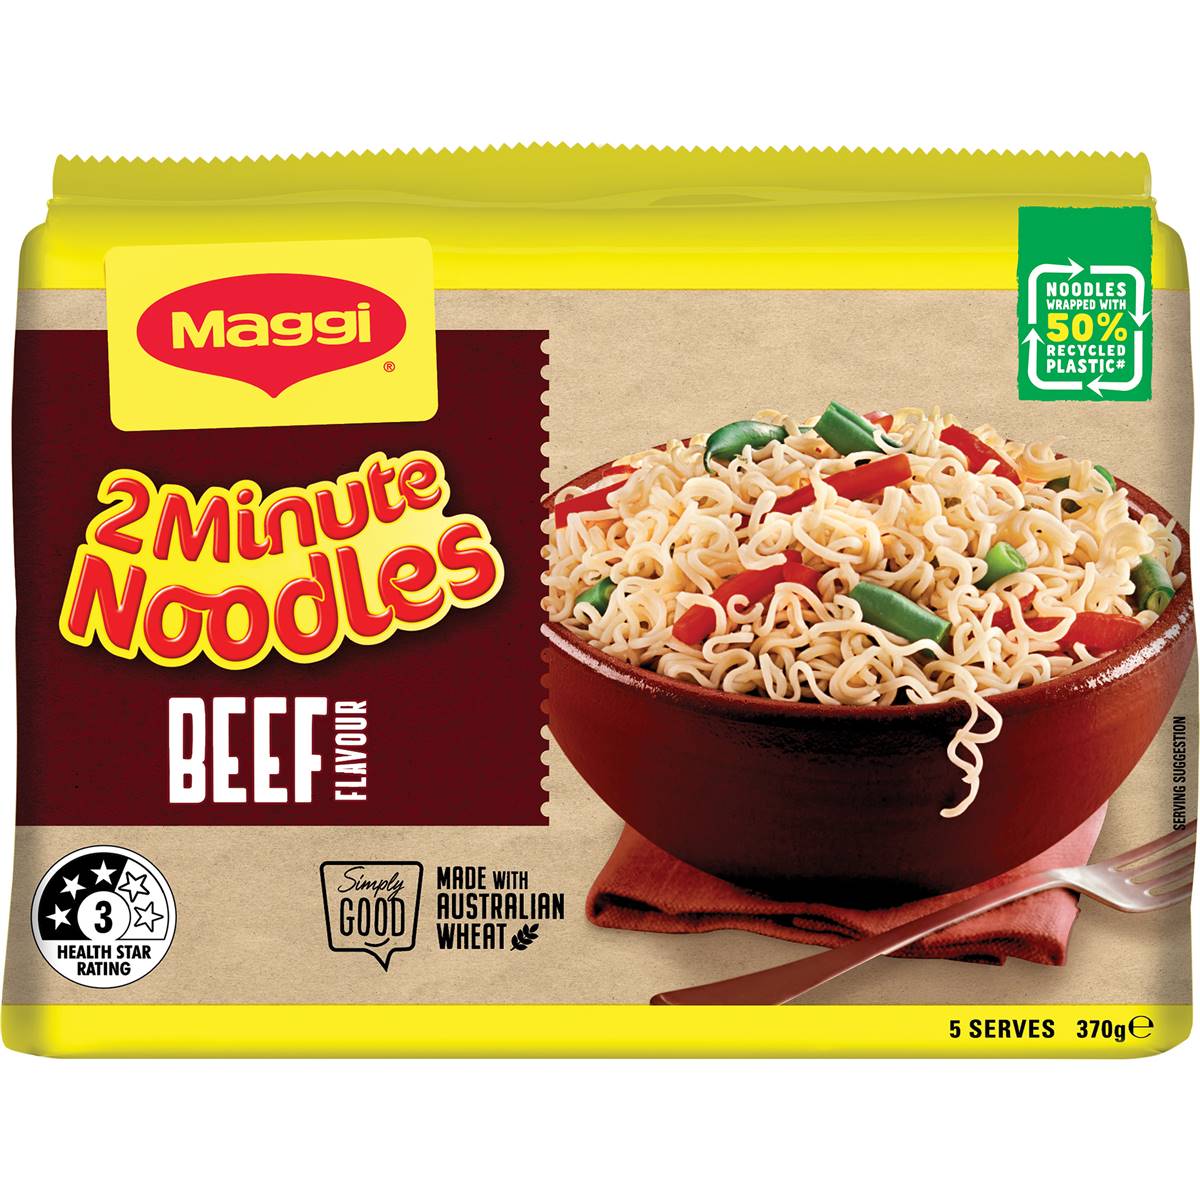 Maggi Beef 2 Minute Noodles